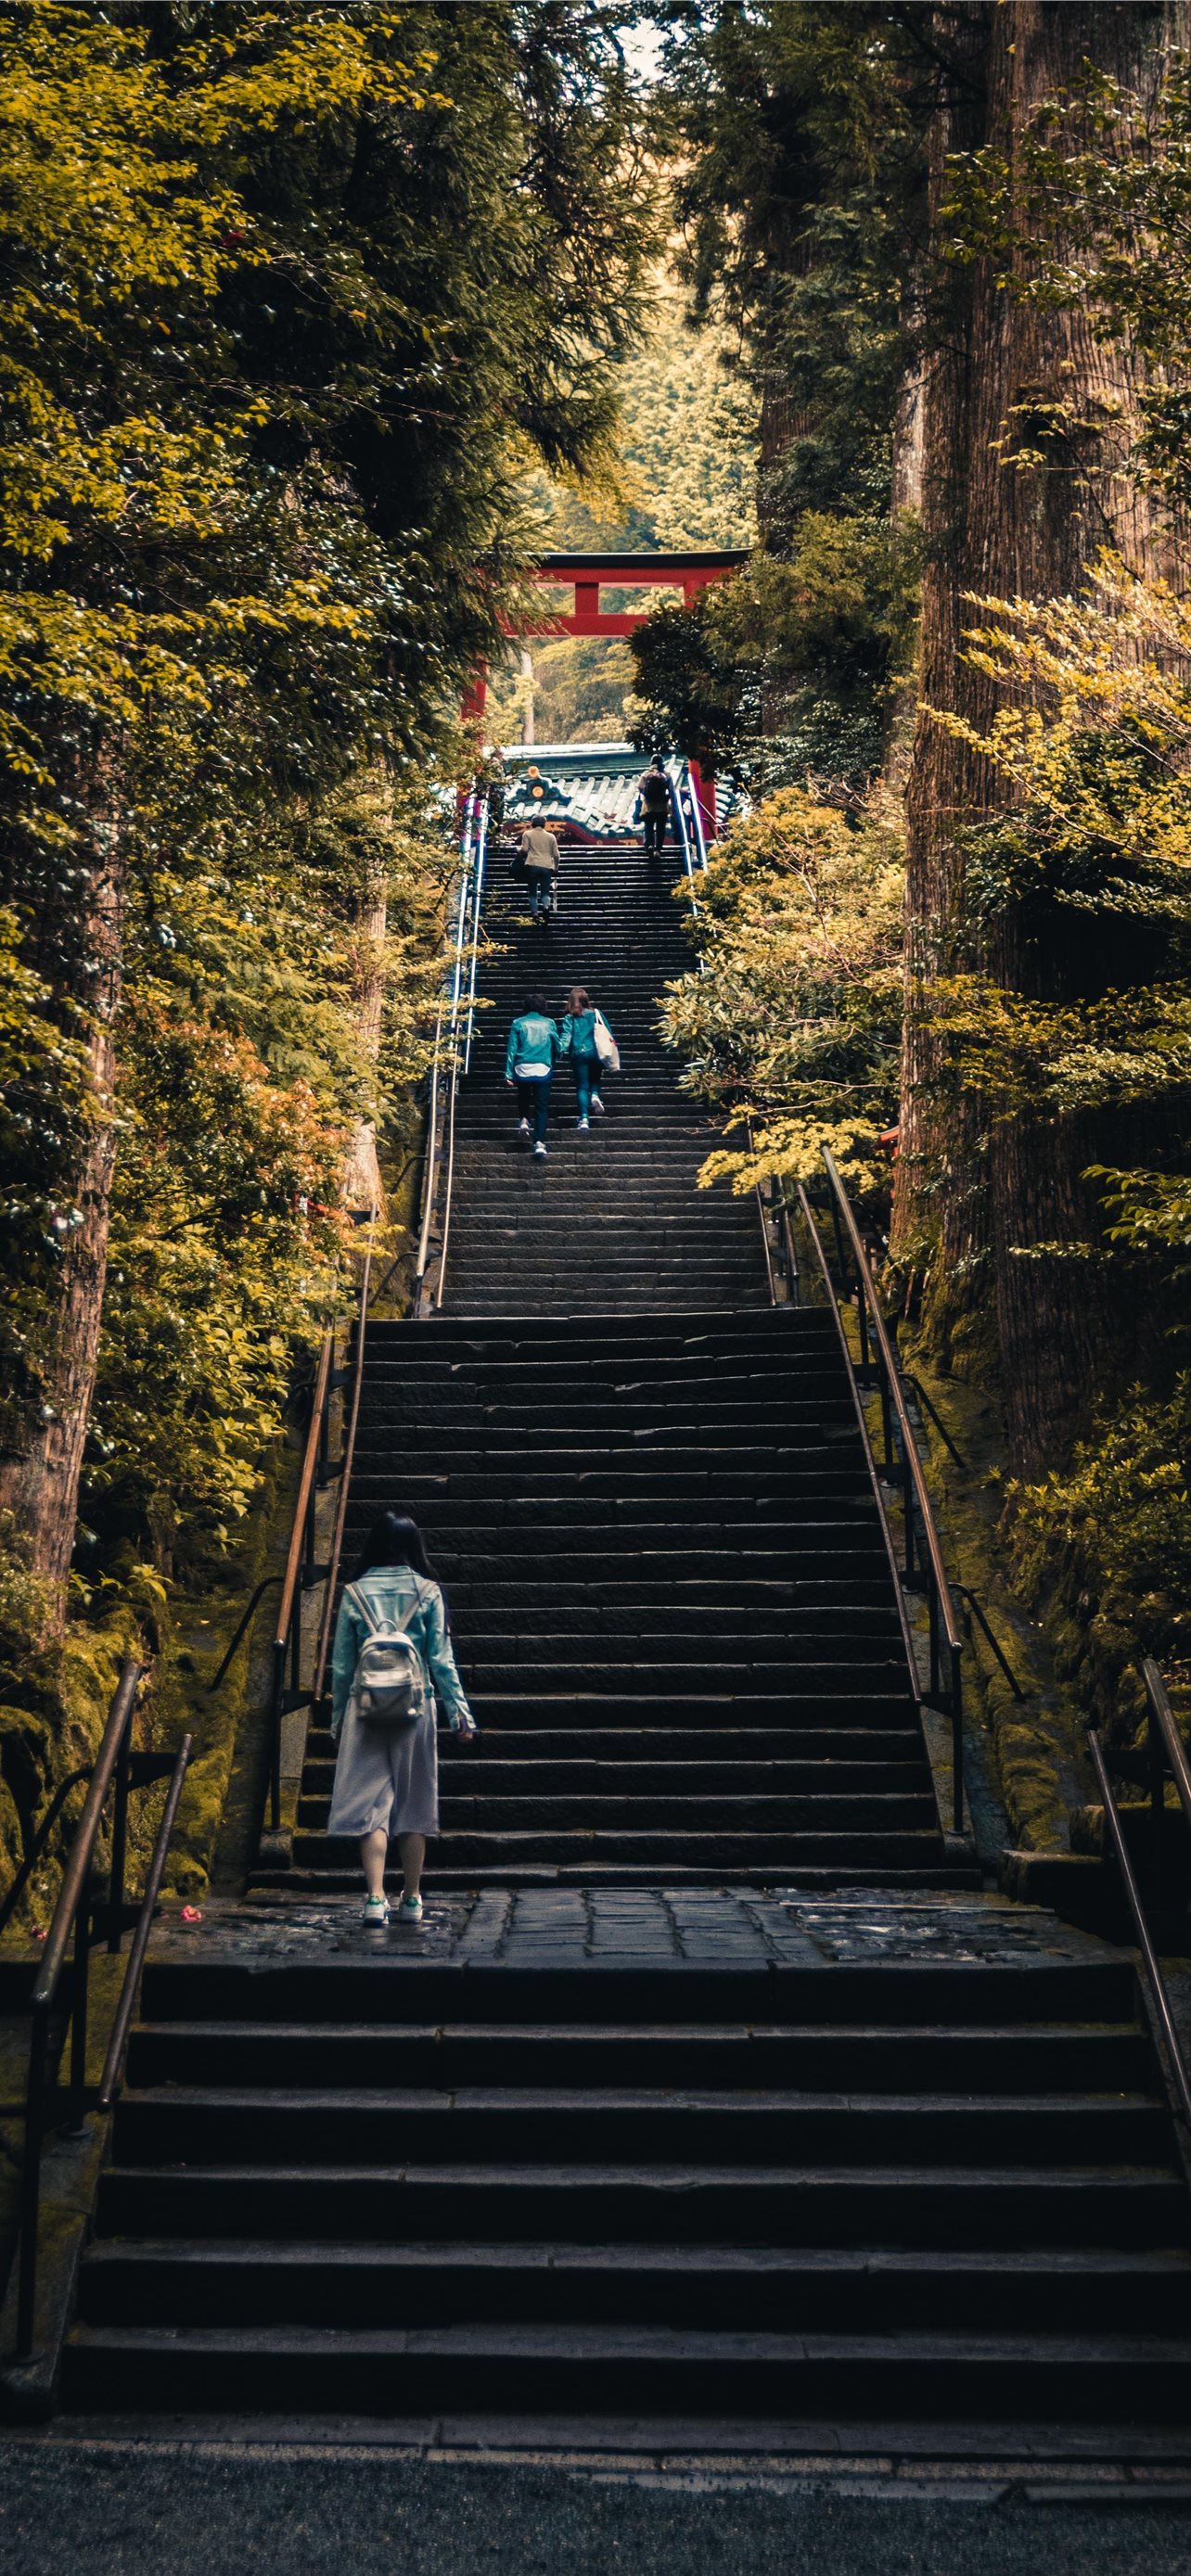 three person walking on stairs between green trees iPhone wallpaper 